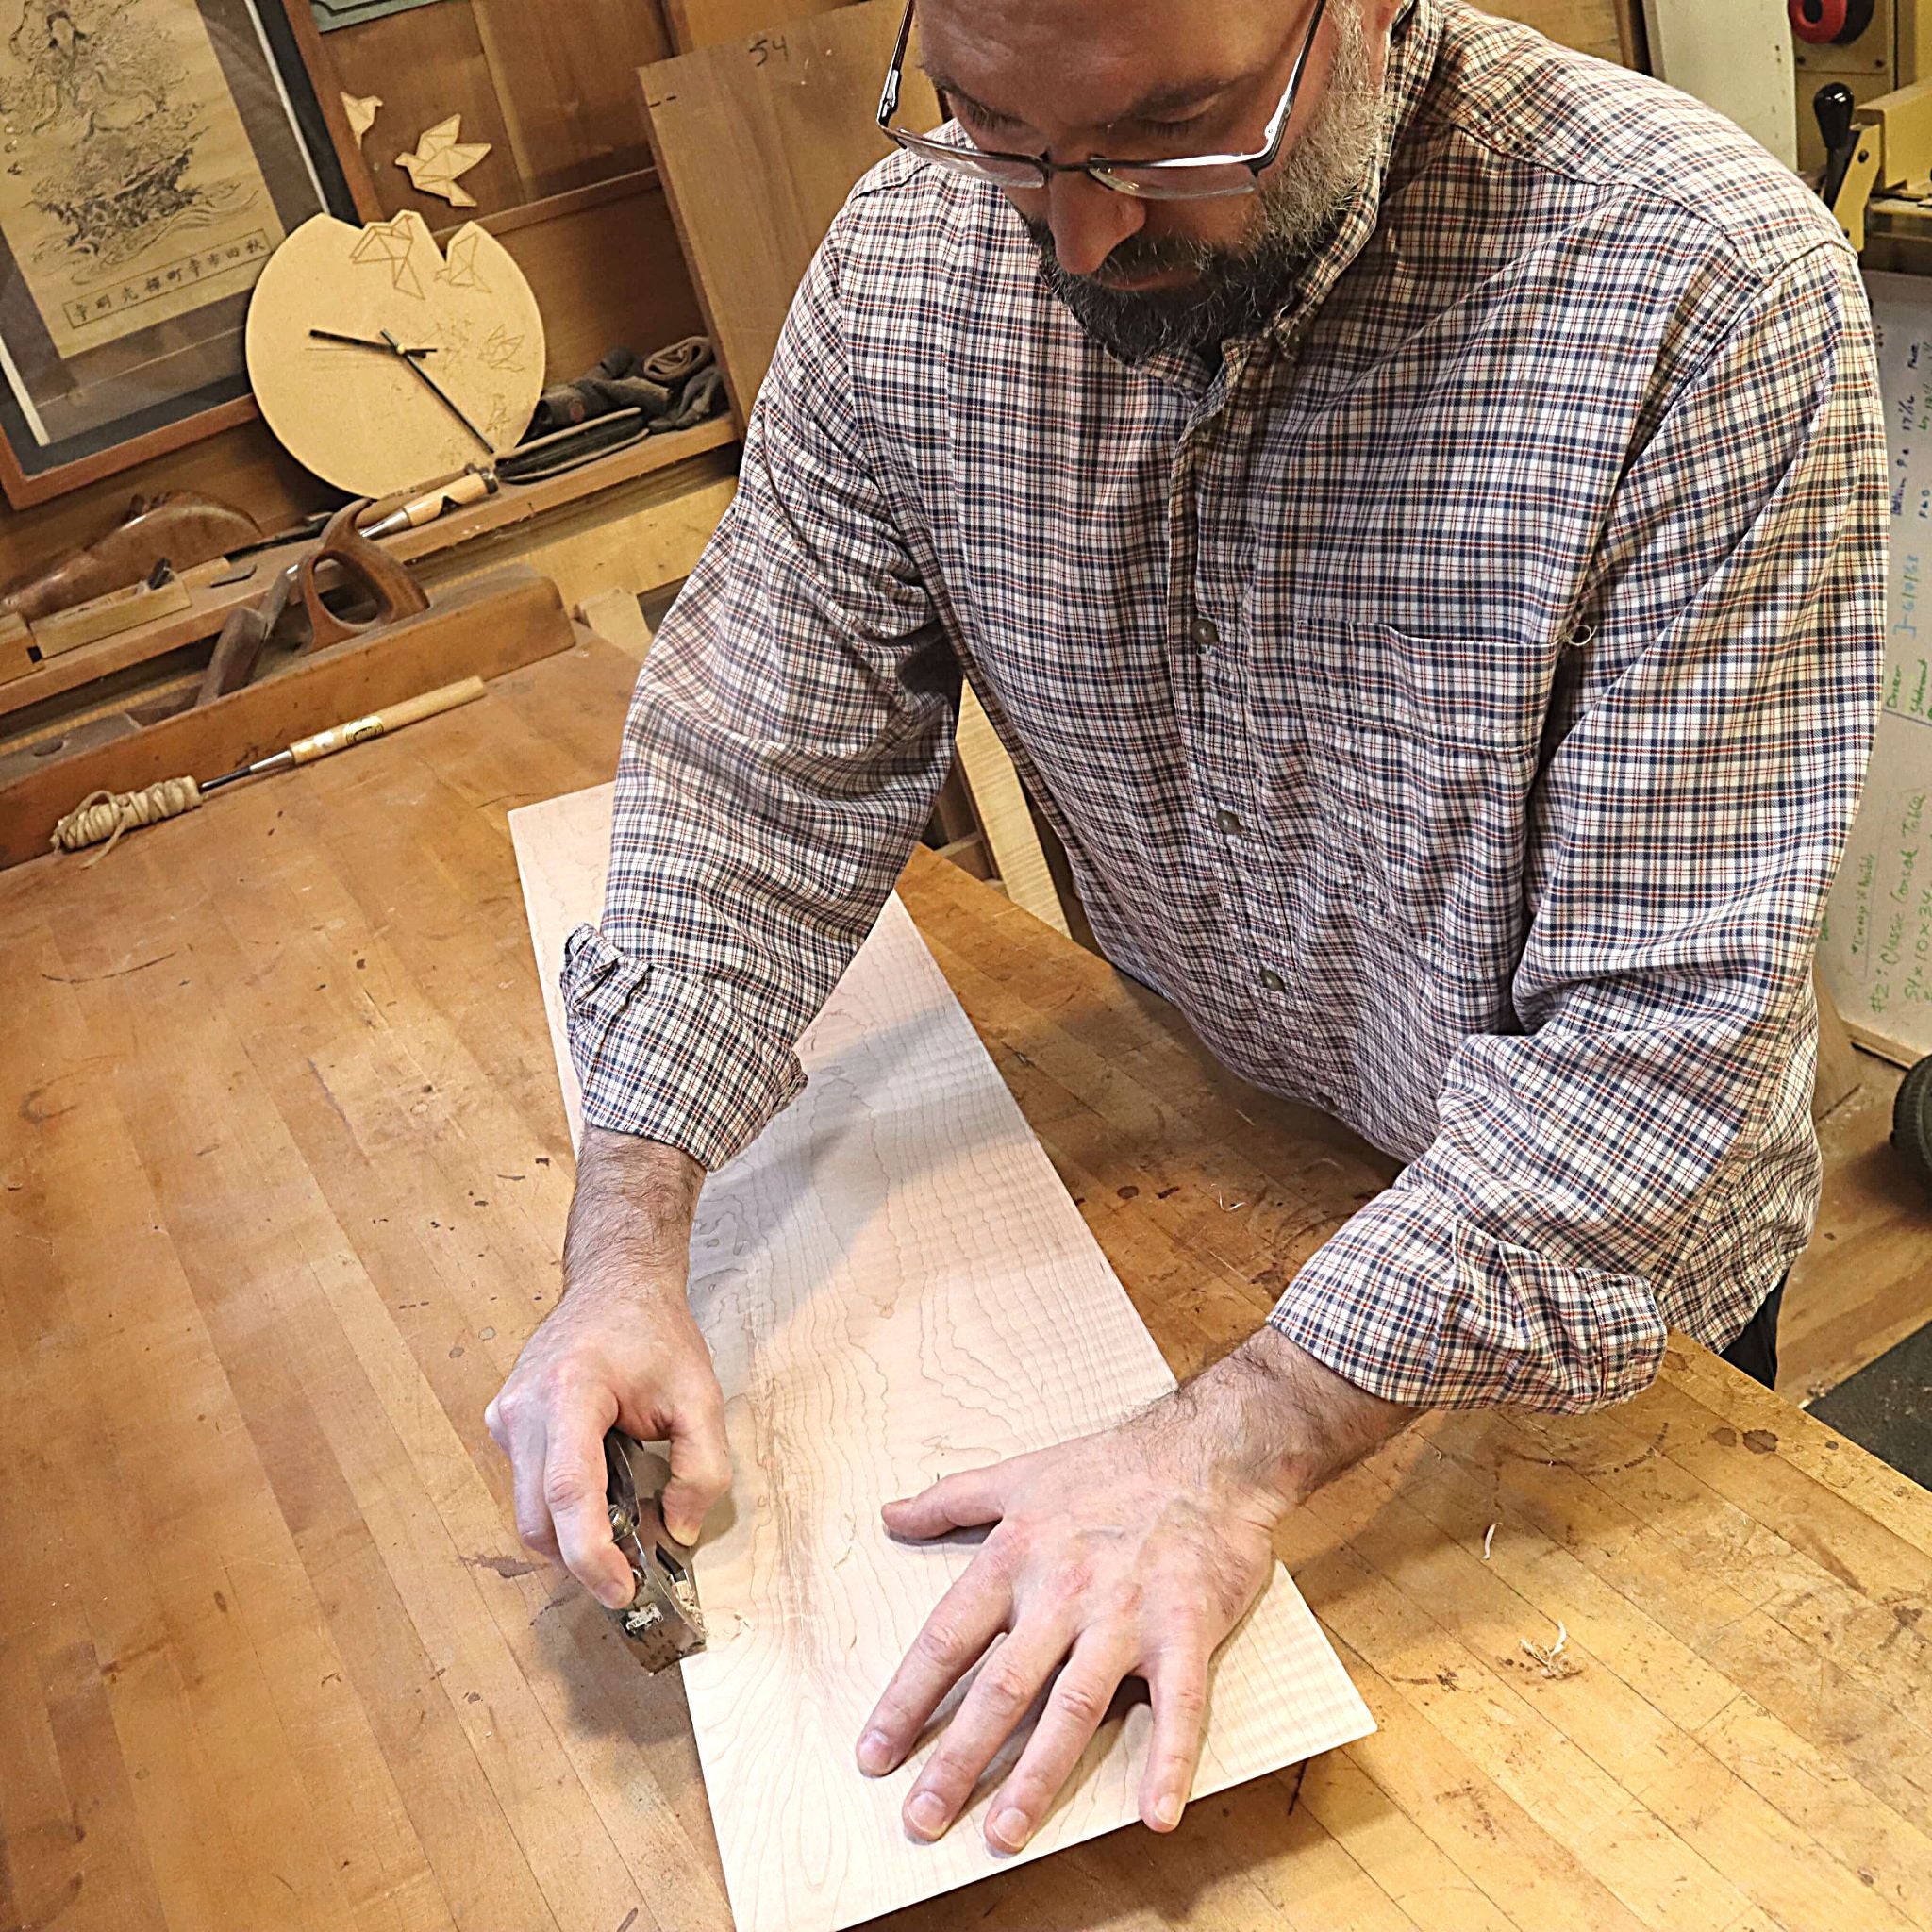 At Mokuzai Furniture, the furnituremaker hand planes the details of a custom console table.